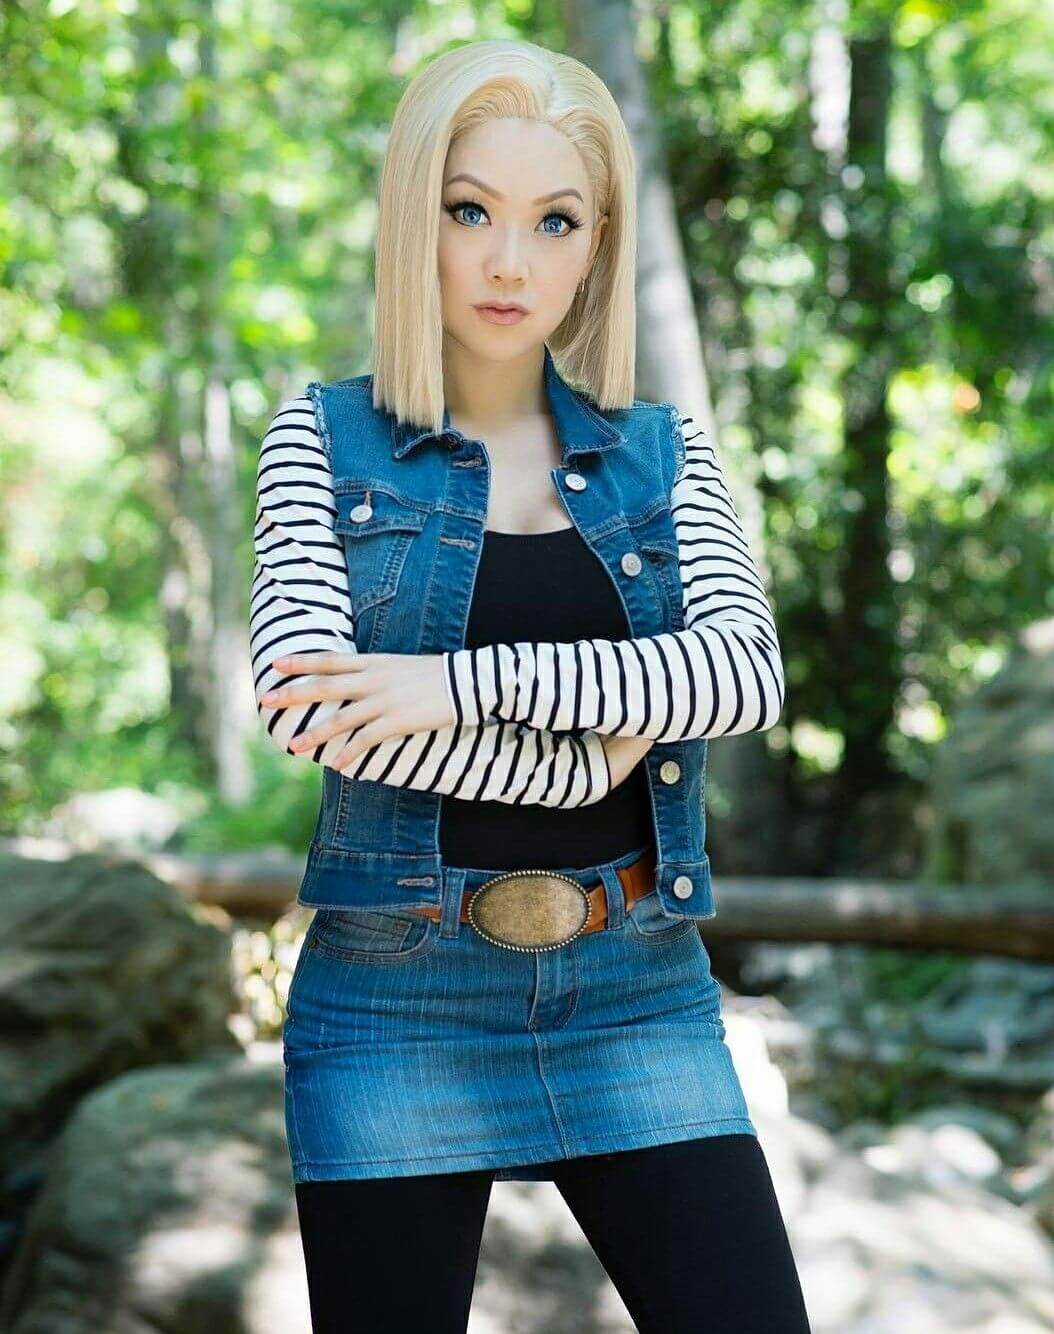 49 Android 18 Nude Pictures Which Prove Beauty Beyond Recognition 10